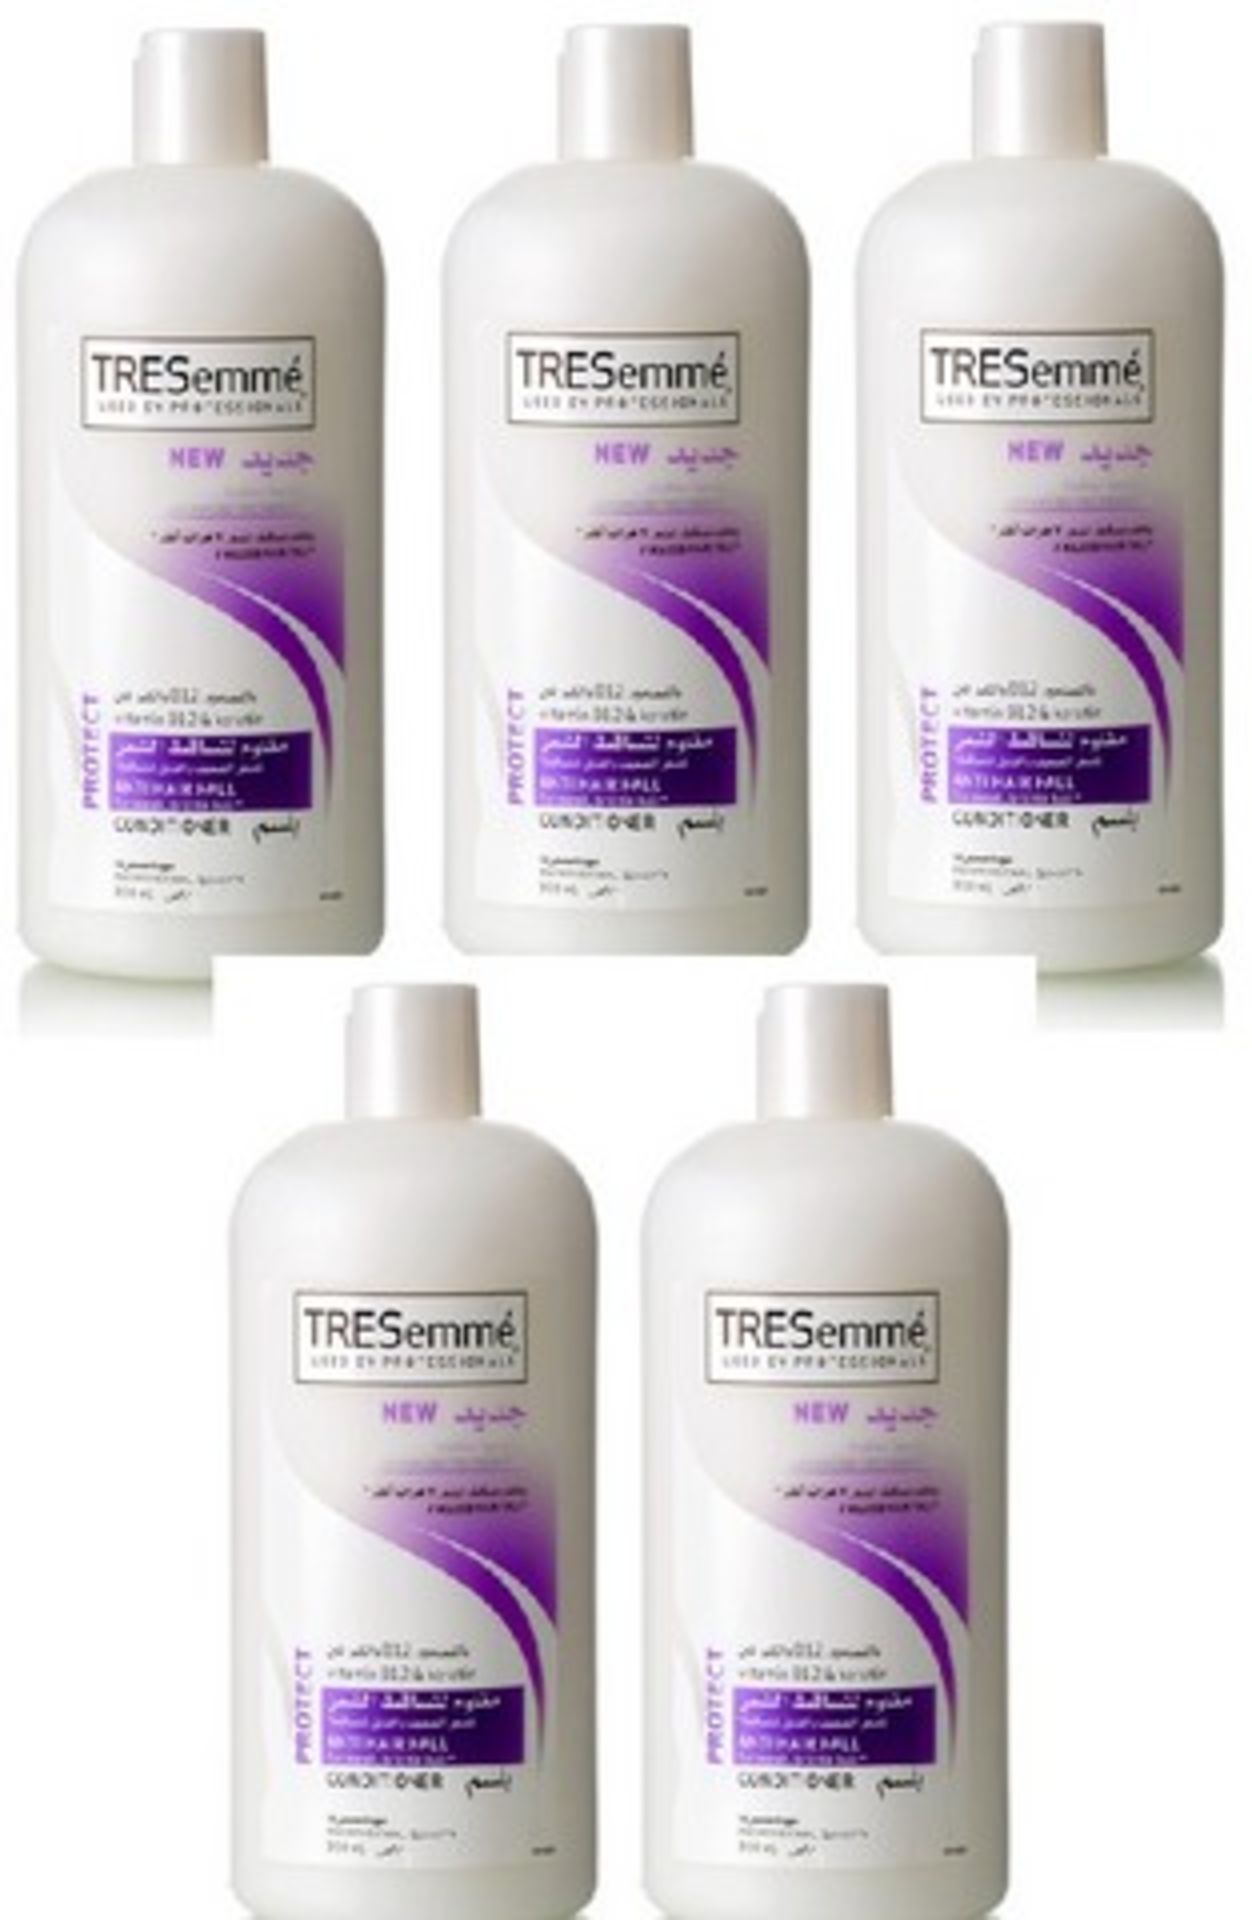 V Brand New Lot Of 5 TRESemme Professional Anti Hair Fall Conditioner 900ml For Weak, Brittle Hair